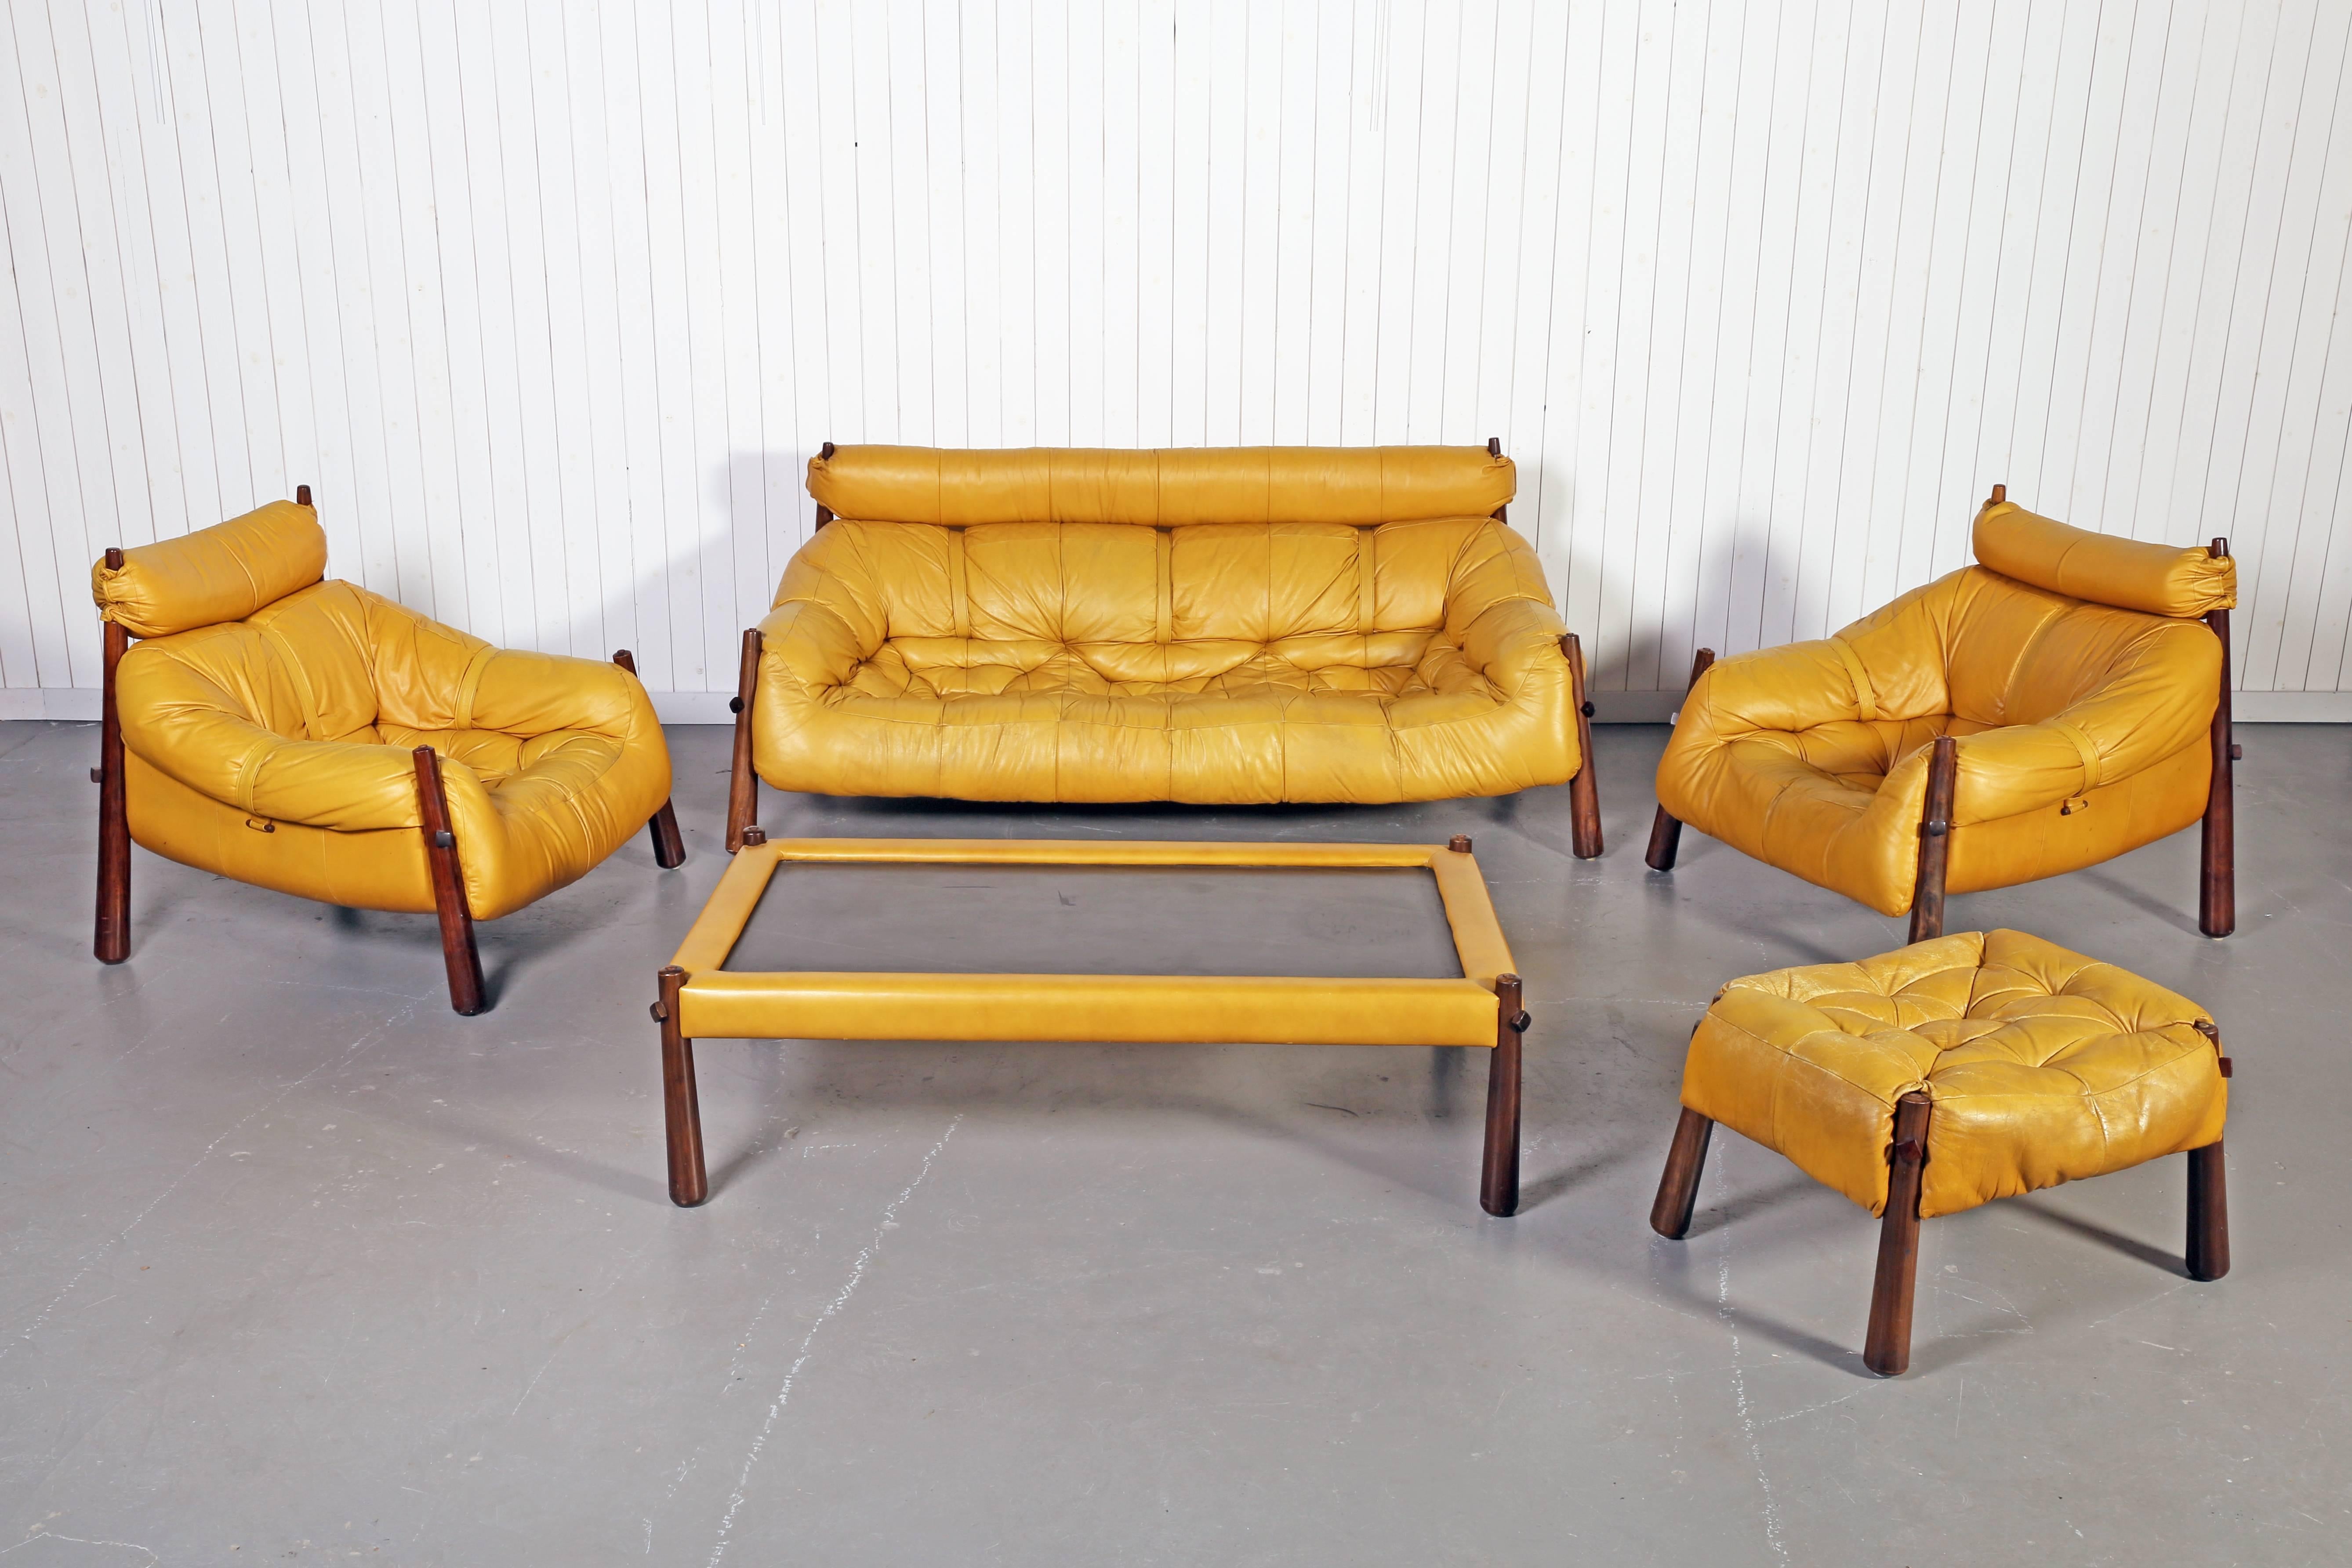 Note: Items individually available.

Very well kept five-piece leather and jacaranda wood Brazilian lounge set designed by Percival Lafer. The leather has a very nice soft feel and a warm patina. Structurally solid and ultra